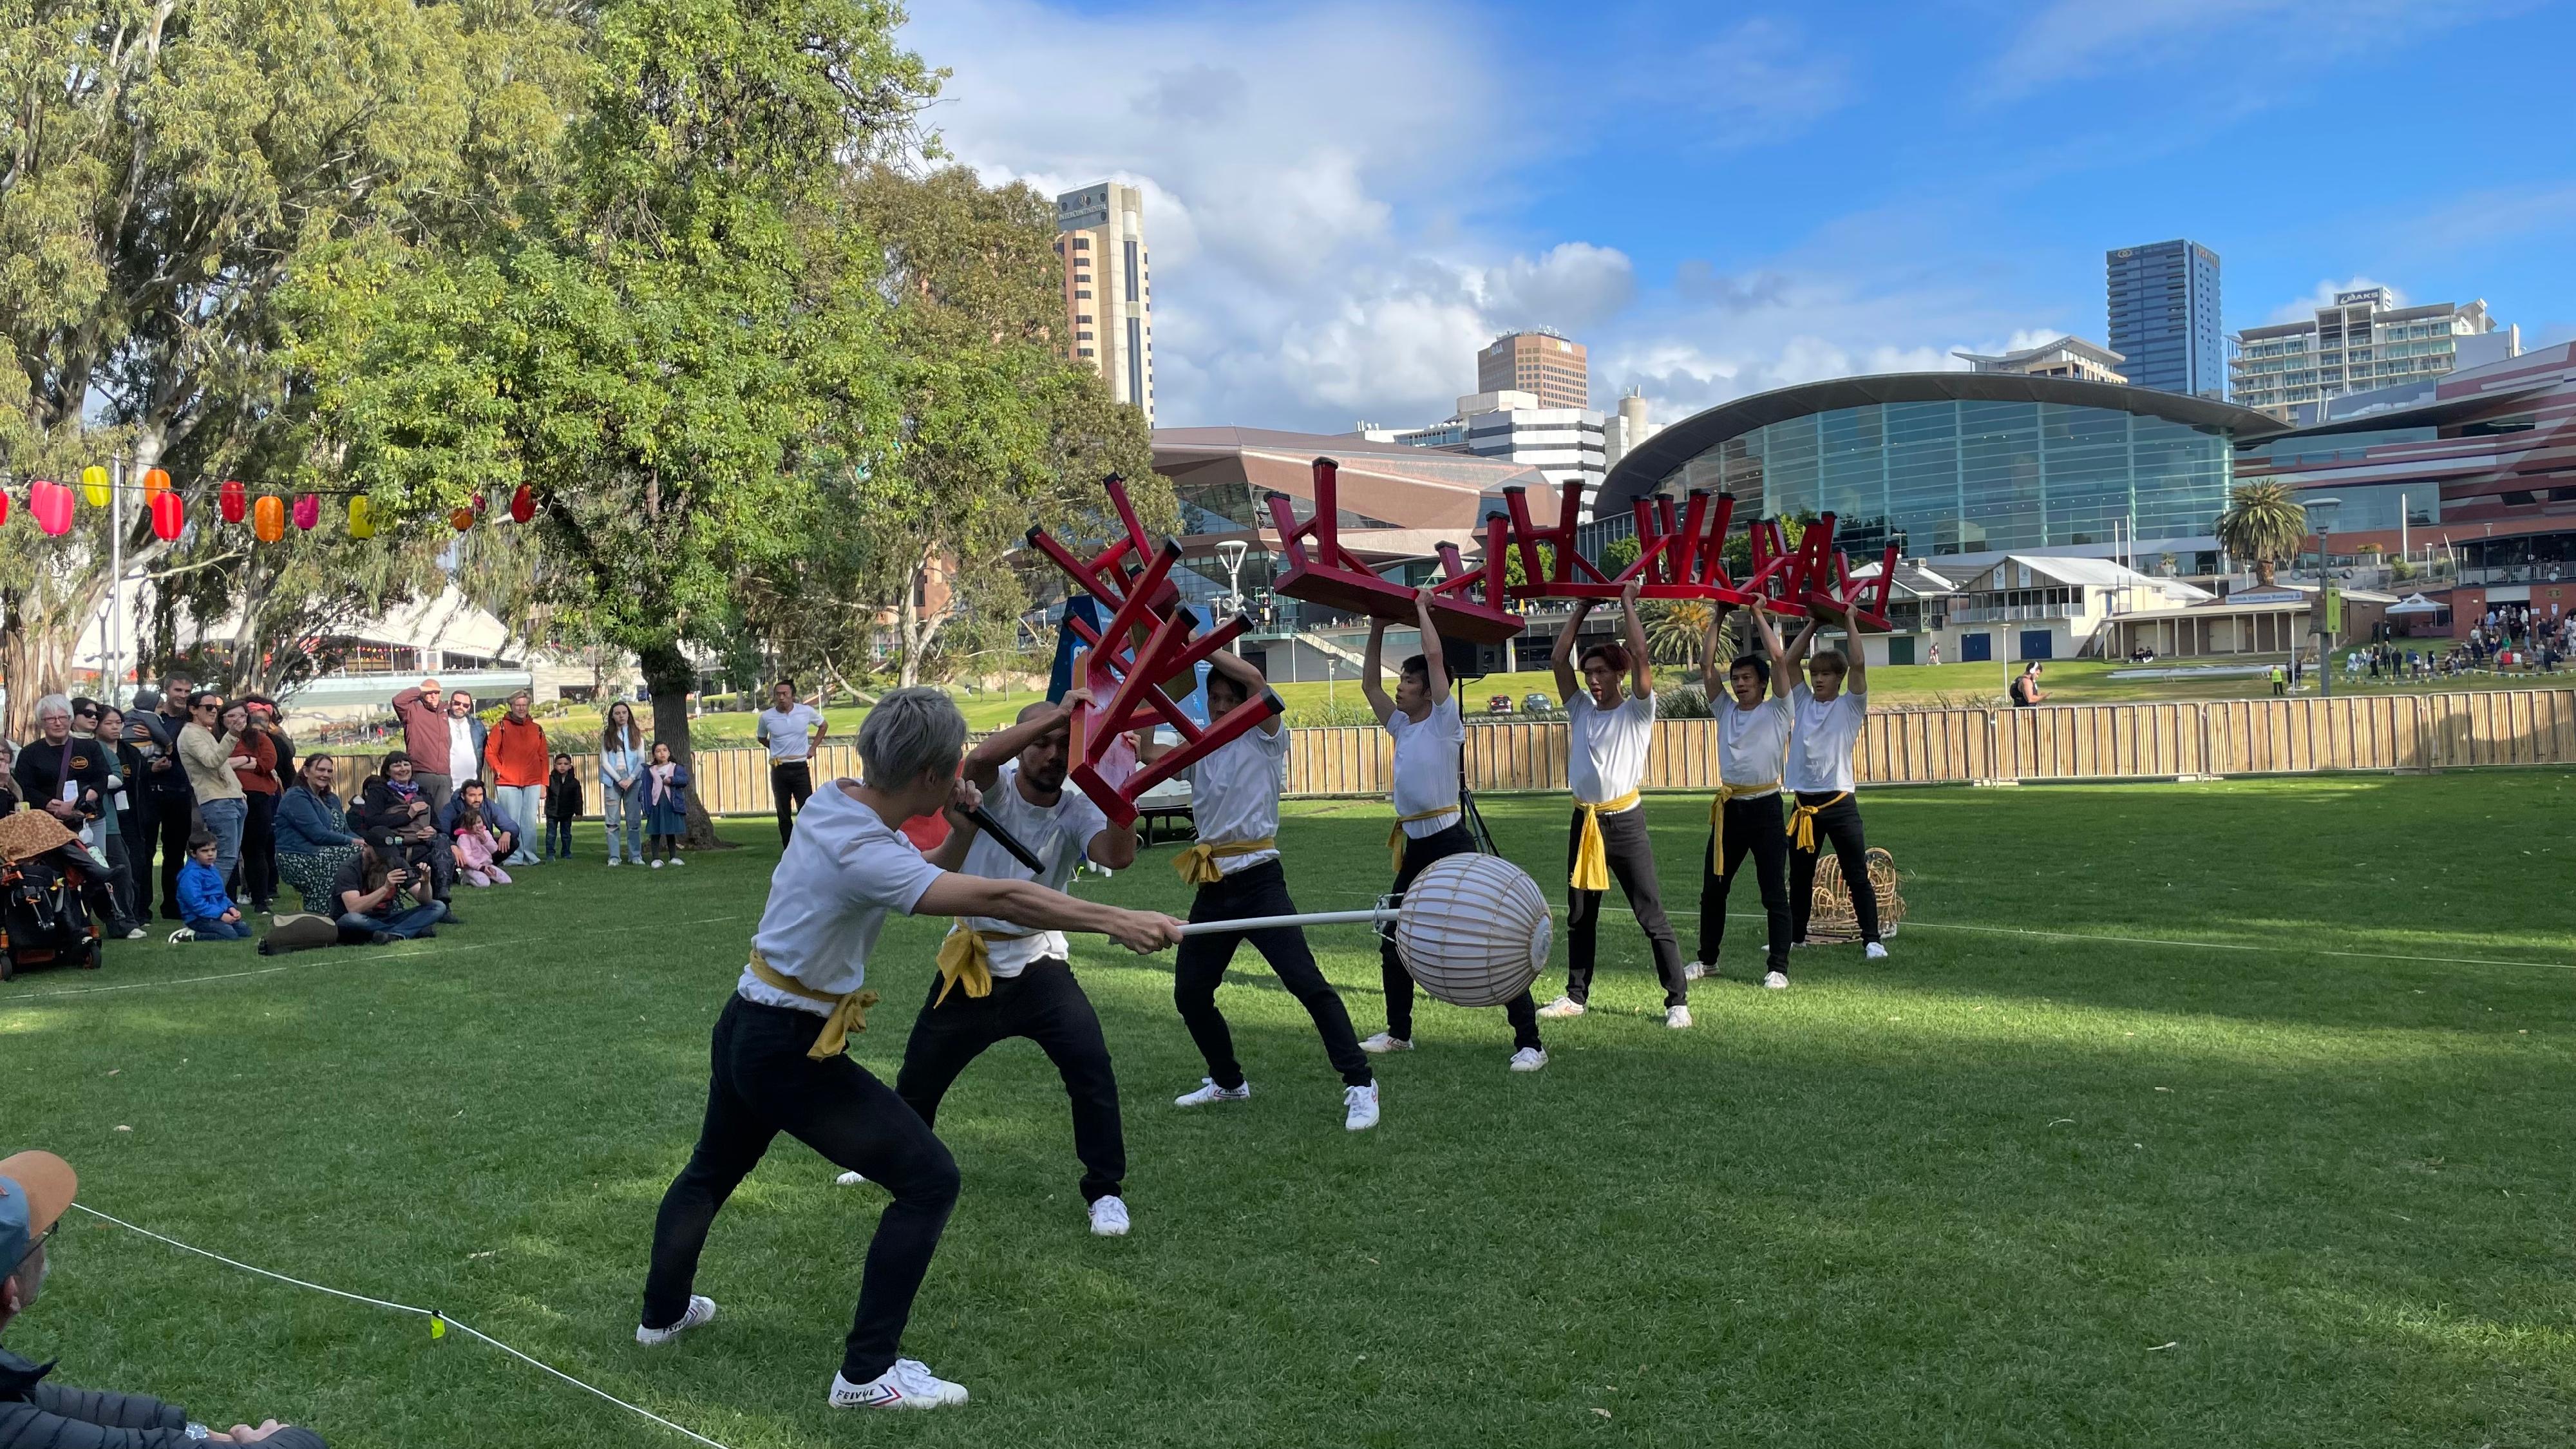 Hong Kong performing arts group TS Crew stages the "No Dragon No Lion" performance at the OzAsia Festival on October 21, which marries elements of a lion dance and Chinese opera with beatboxing, martial arts, tricking, and parkour.





